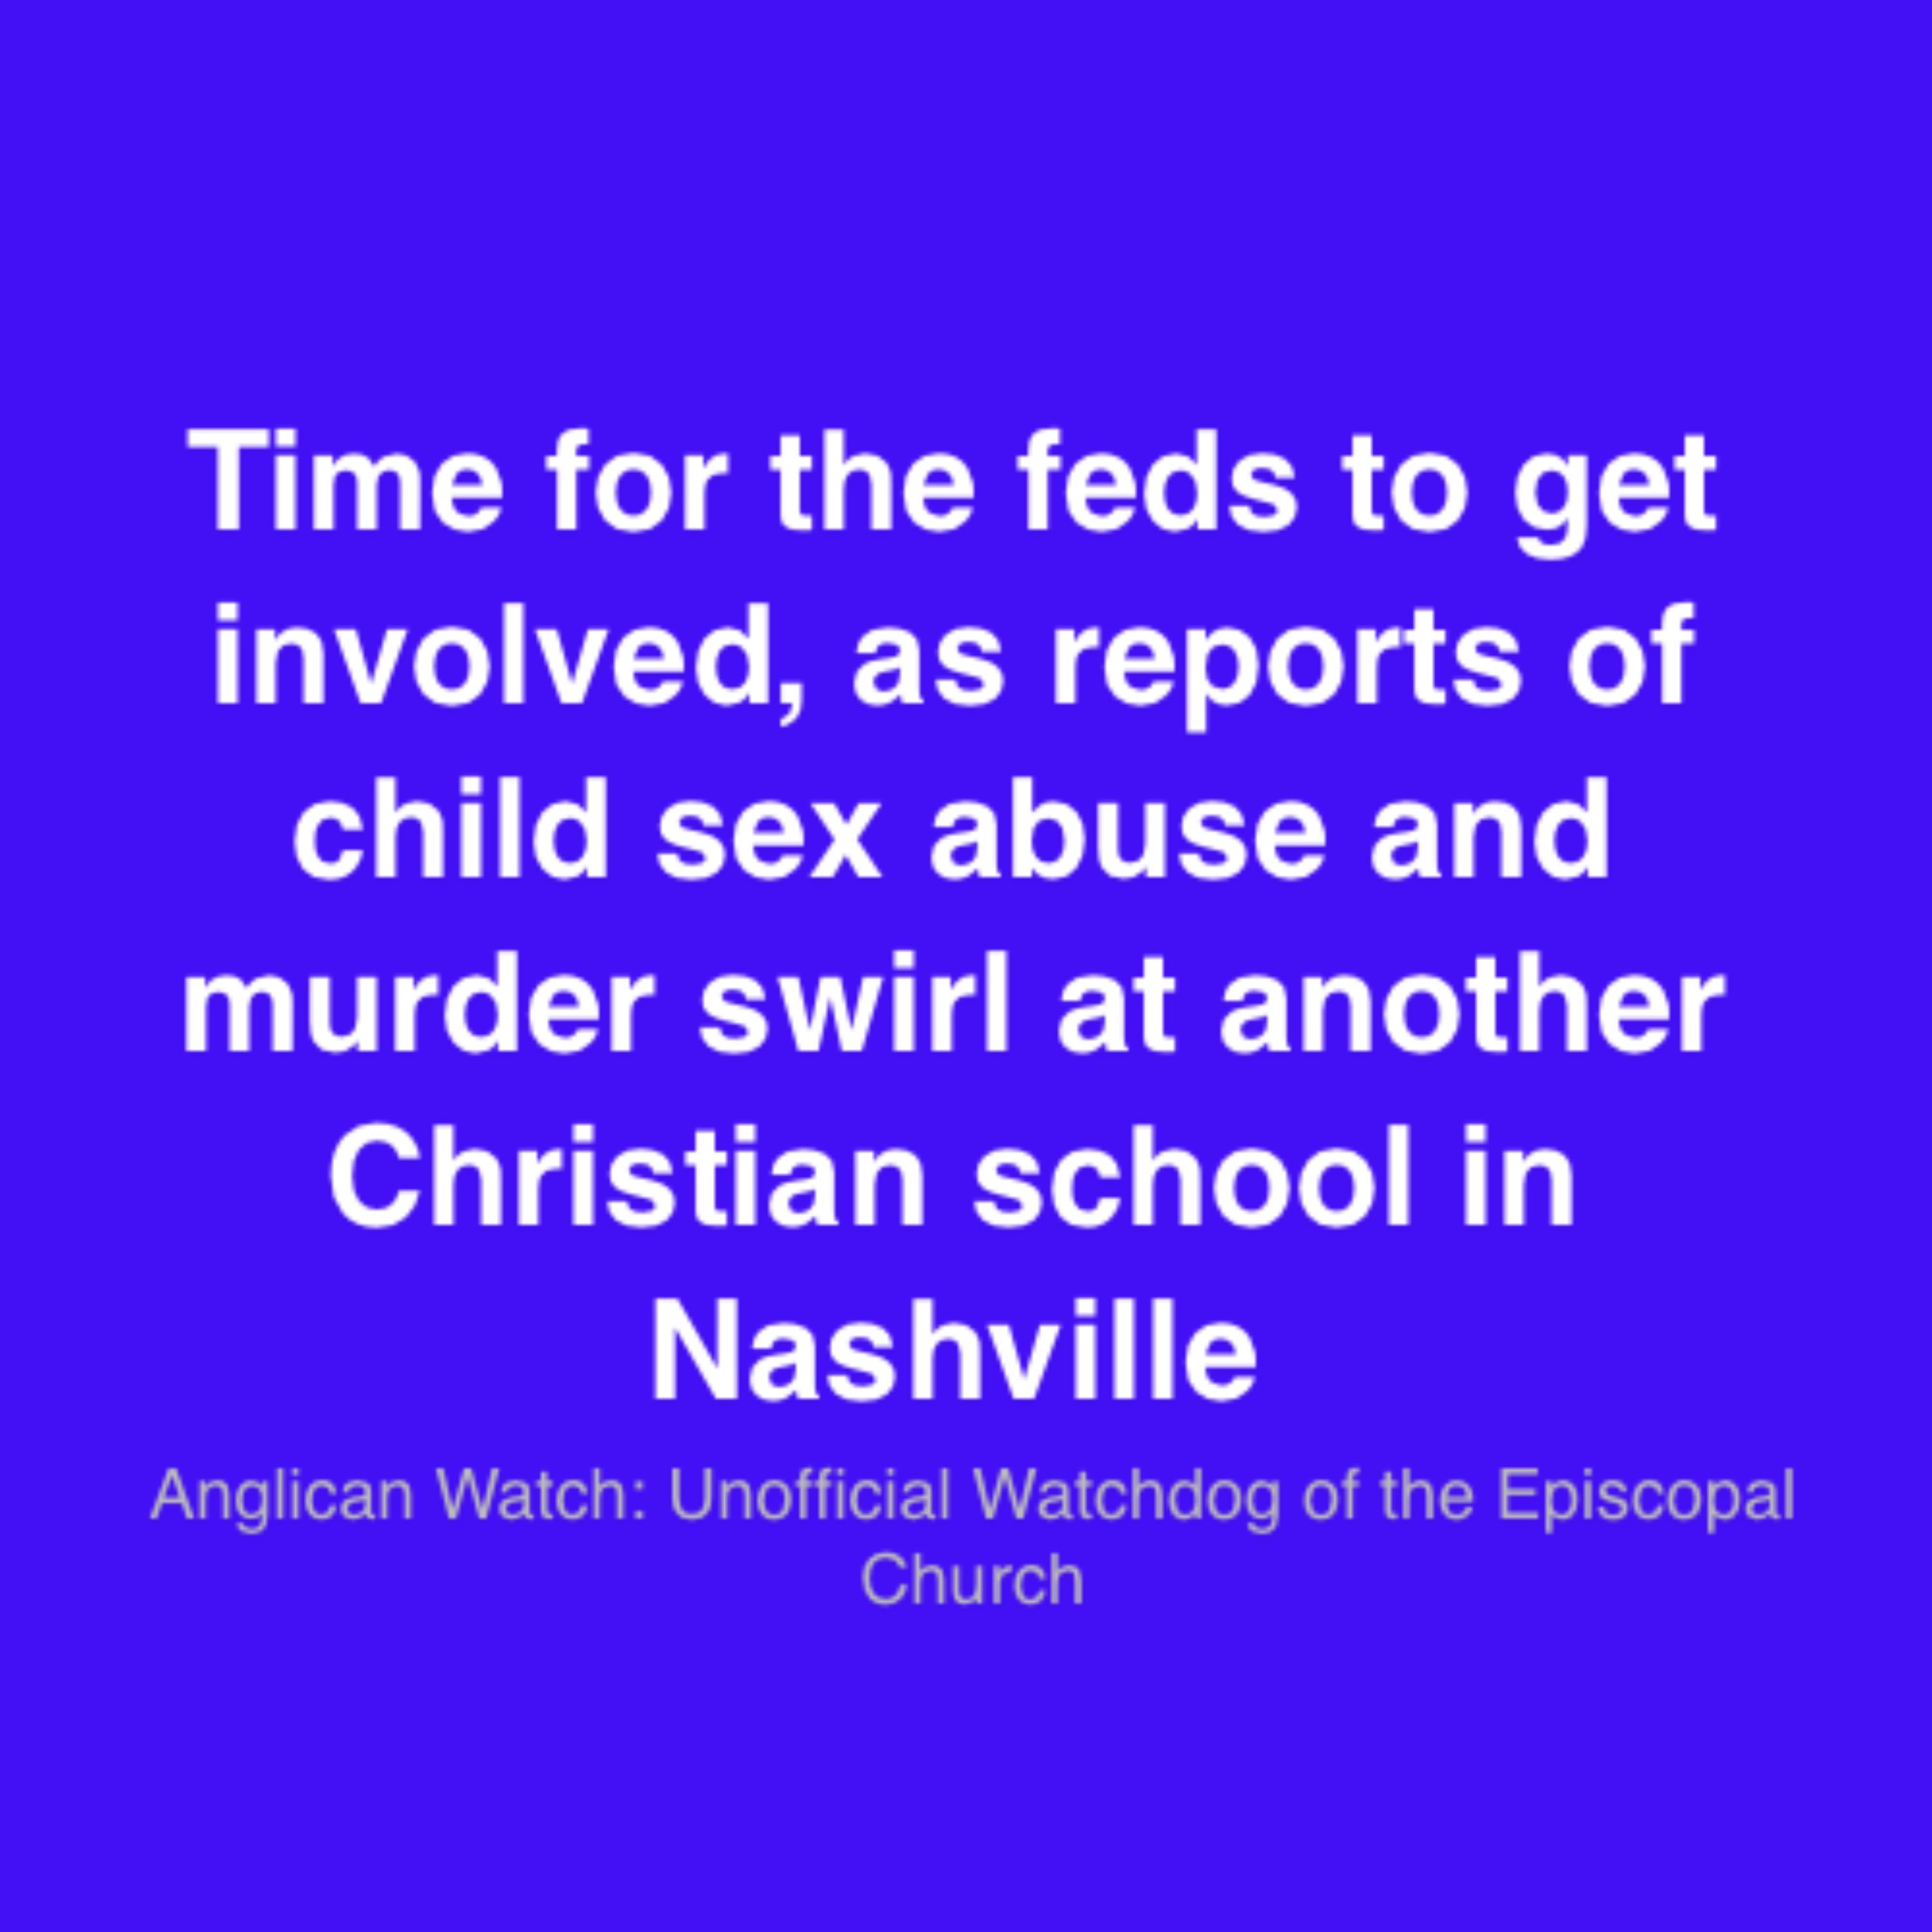 Time for the feds to get involved, as reports of child sex abuse and murder swirl at another Christian school in Nashville